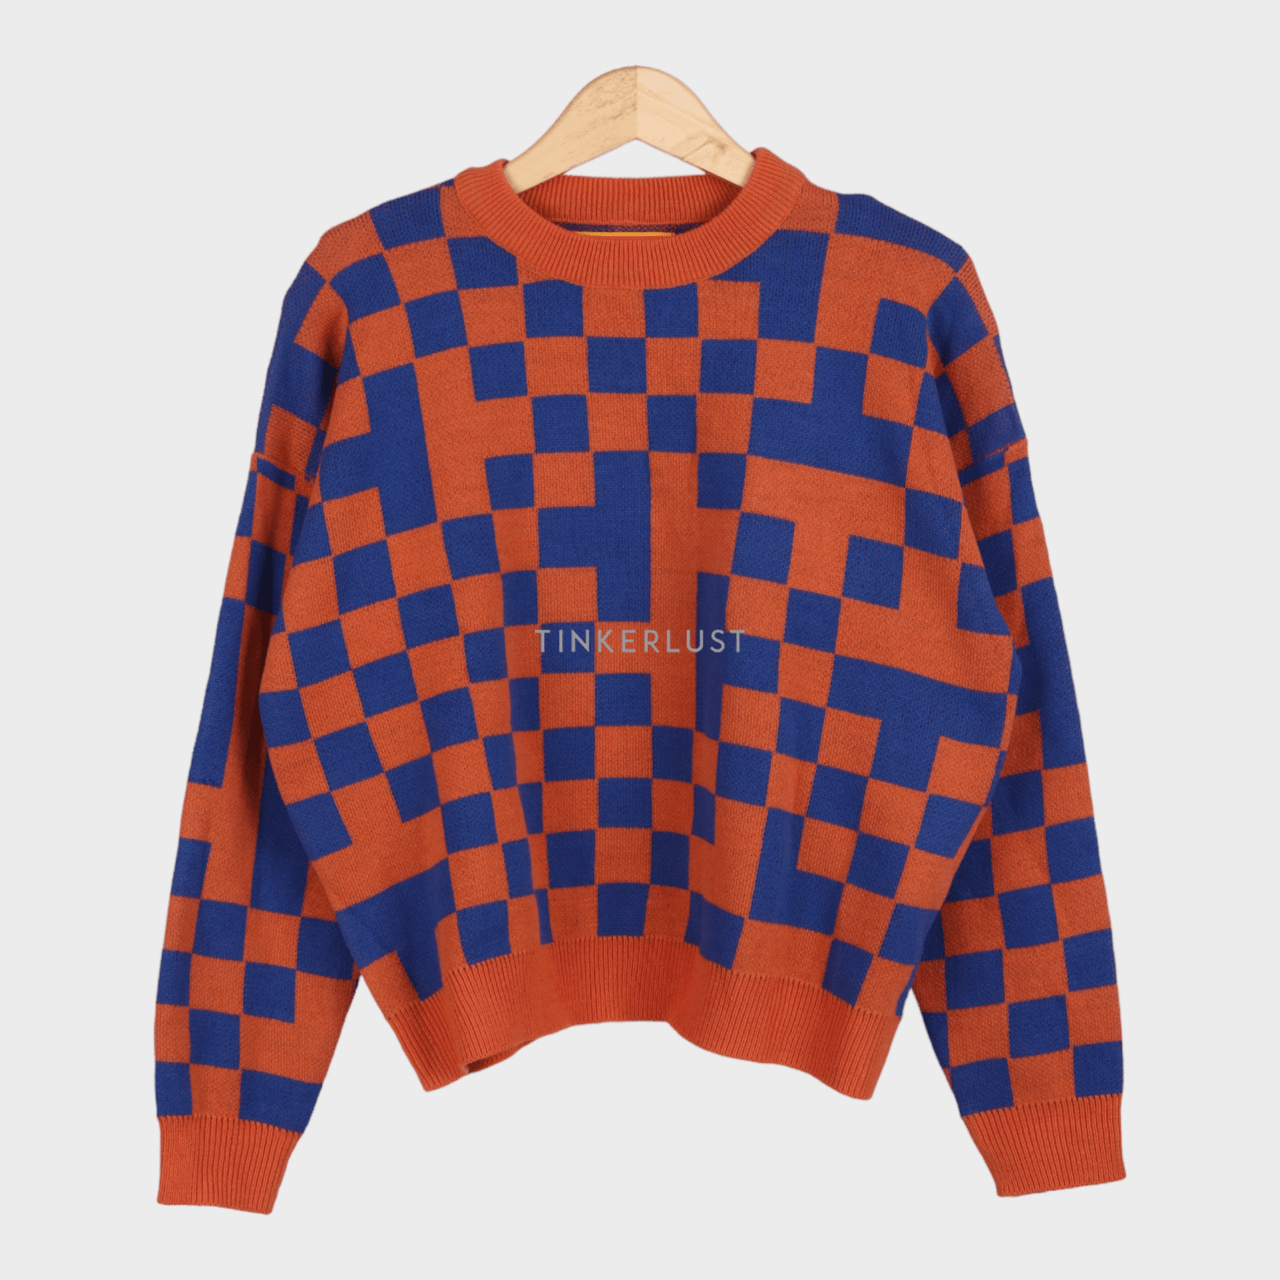 Play With Pattero Blue & Orange Sweater